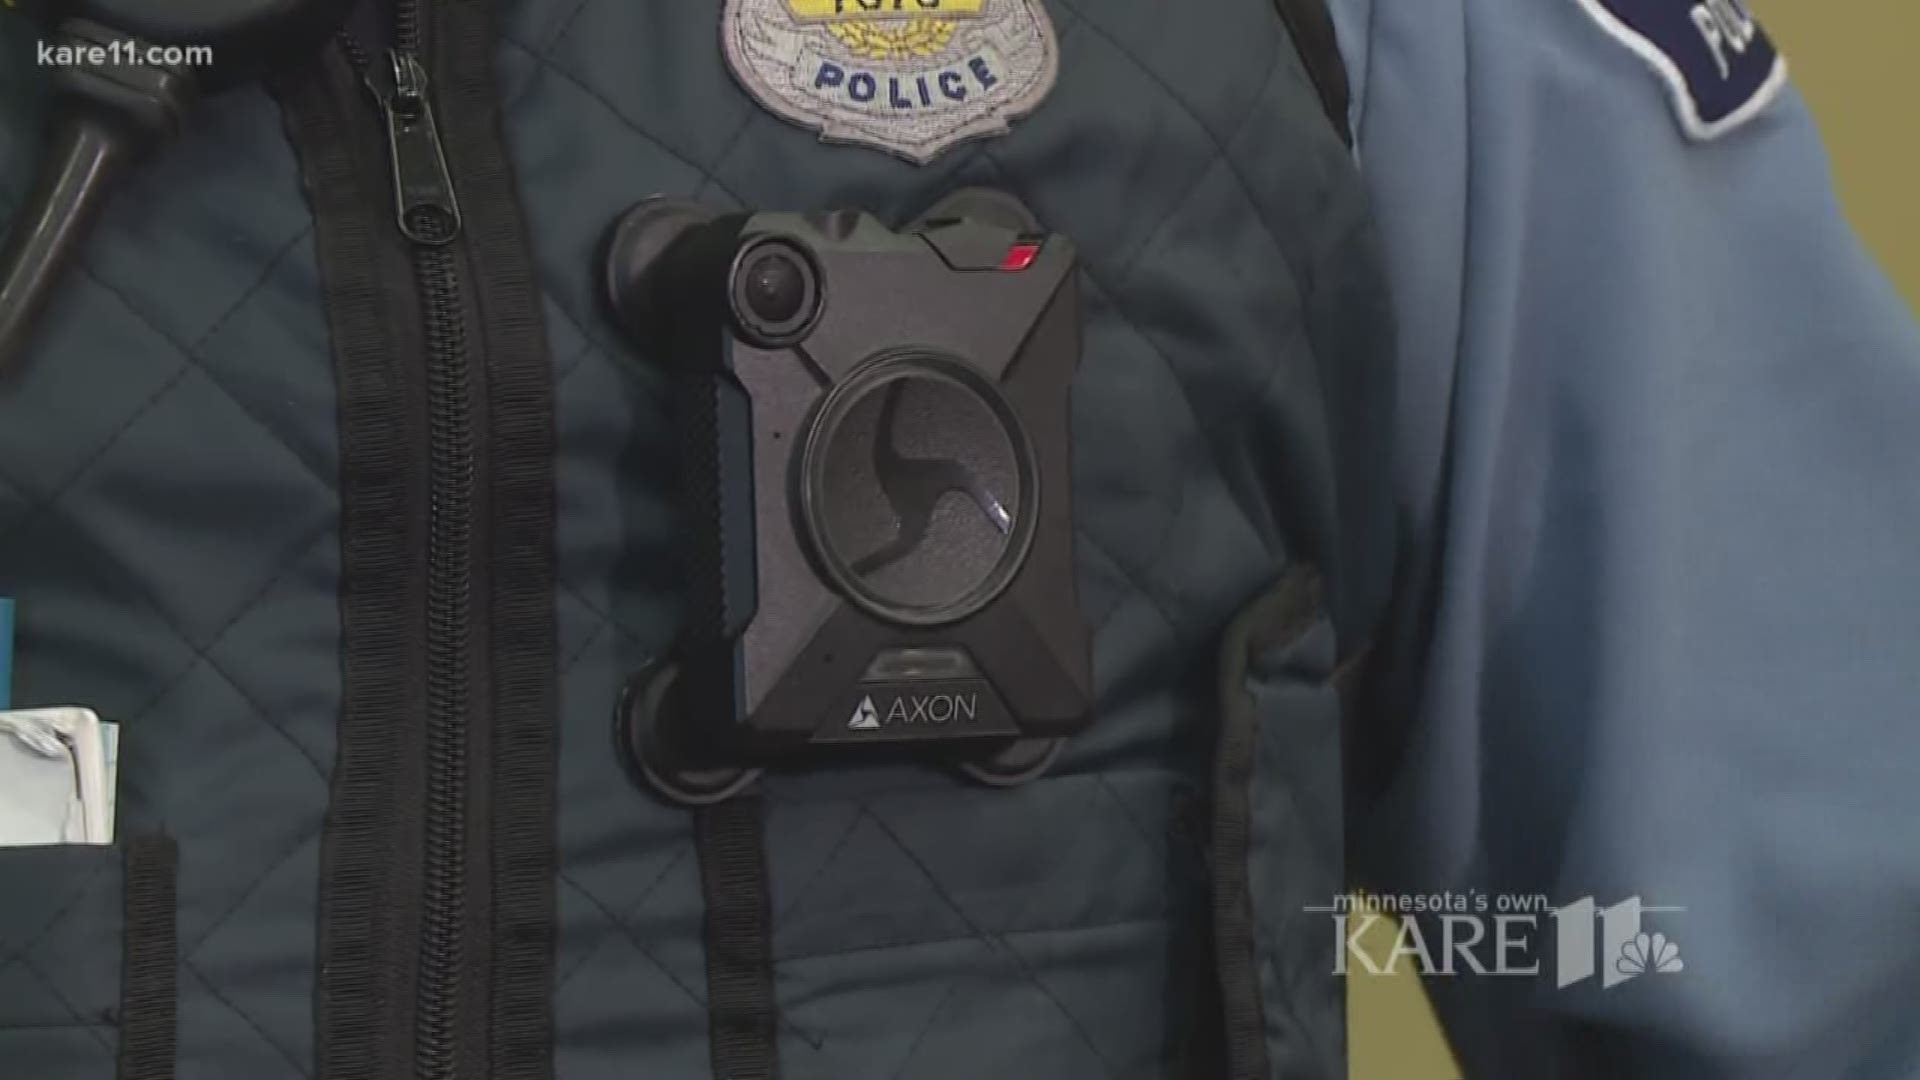 Minneapolis Police Department launches new, stricter body camera policy